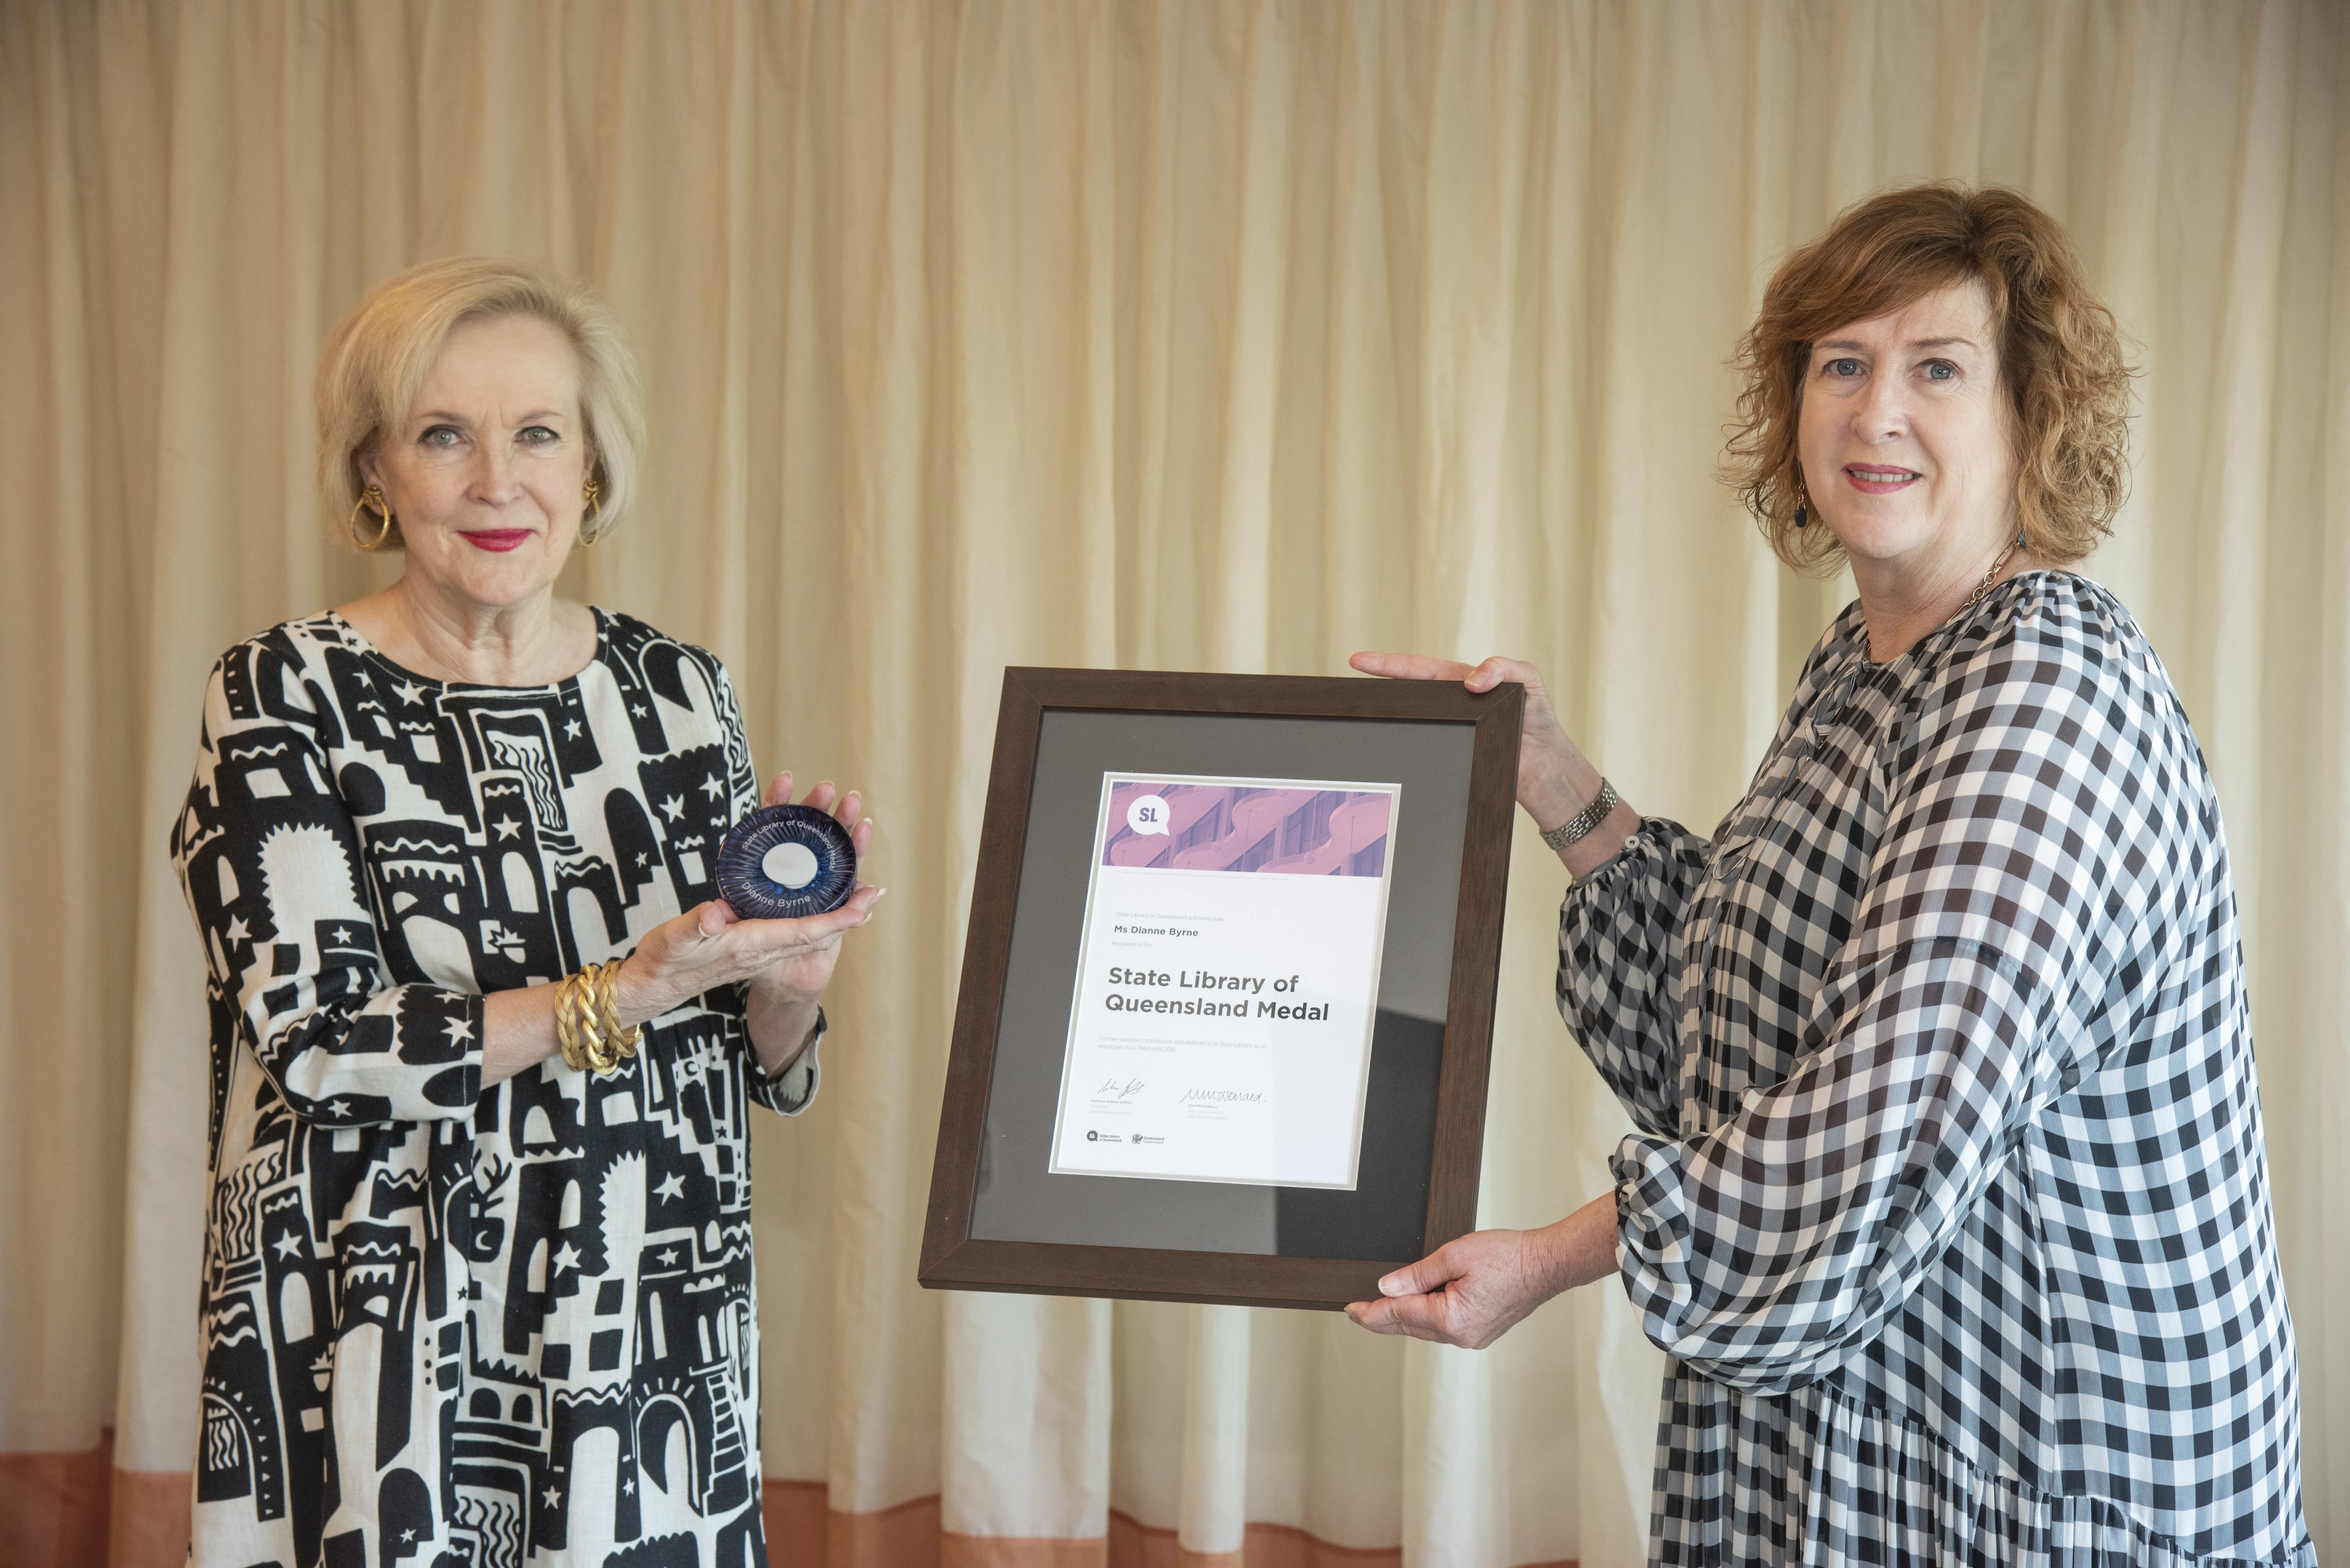 State Librarian, Vicki McDonald presenting Dianne Byrne with the State Library of Queensland Medal